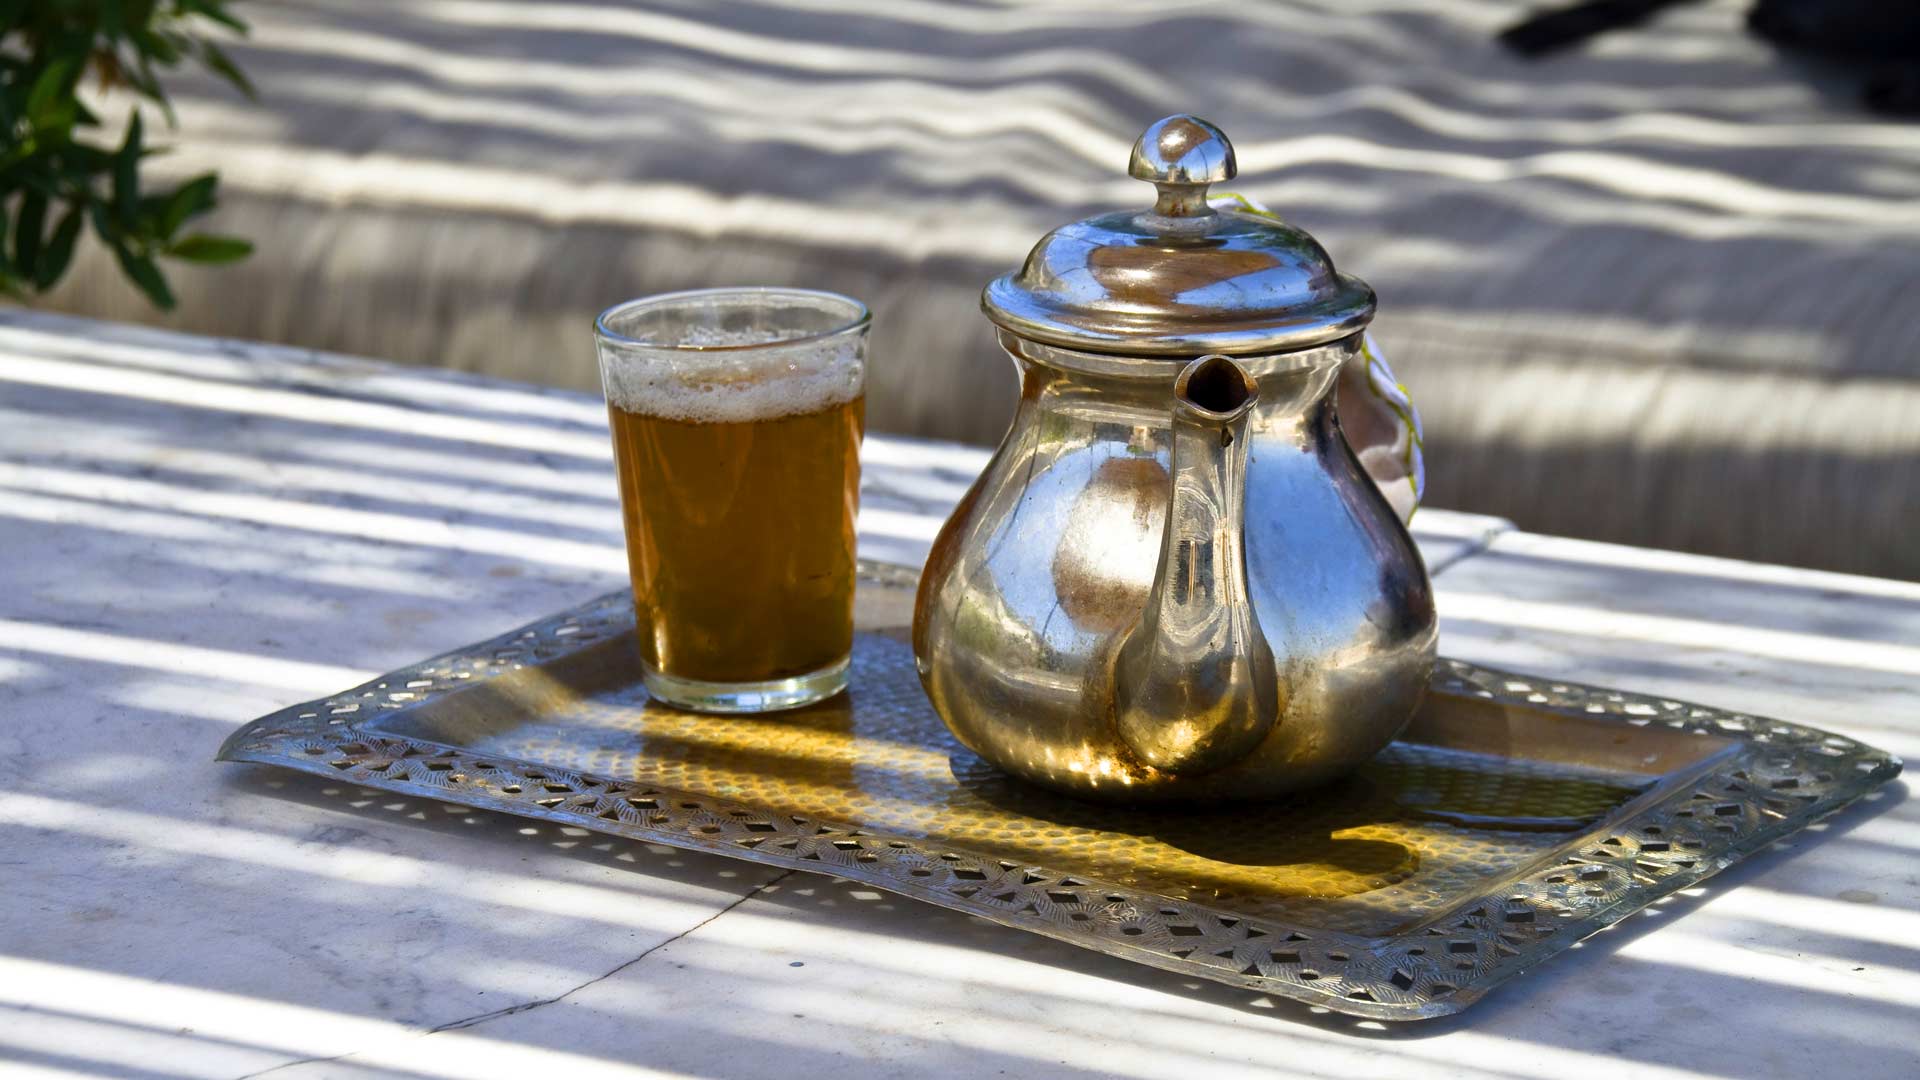 Tea at the Ouzoud waterfalls, Morocco.